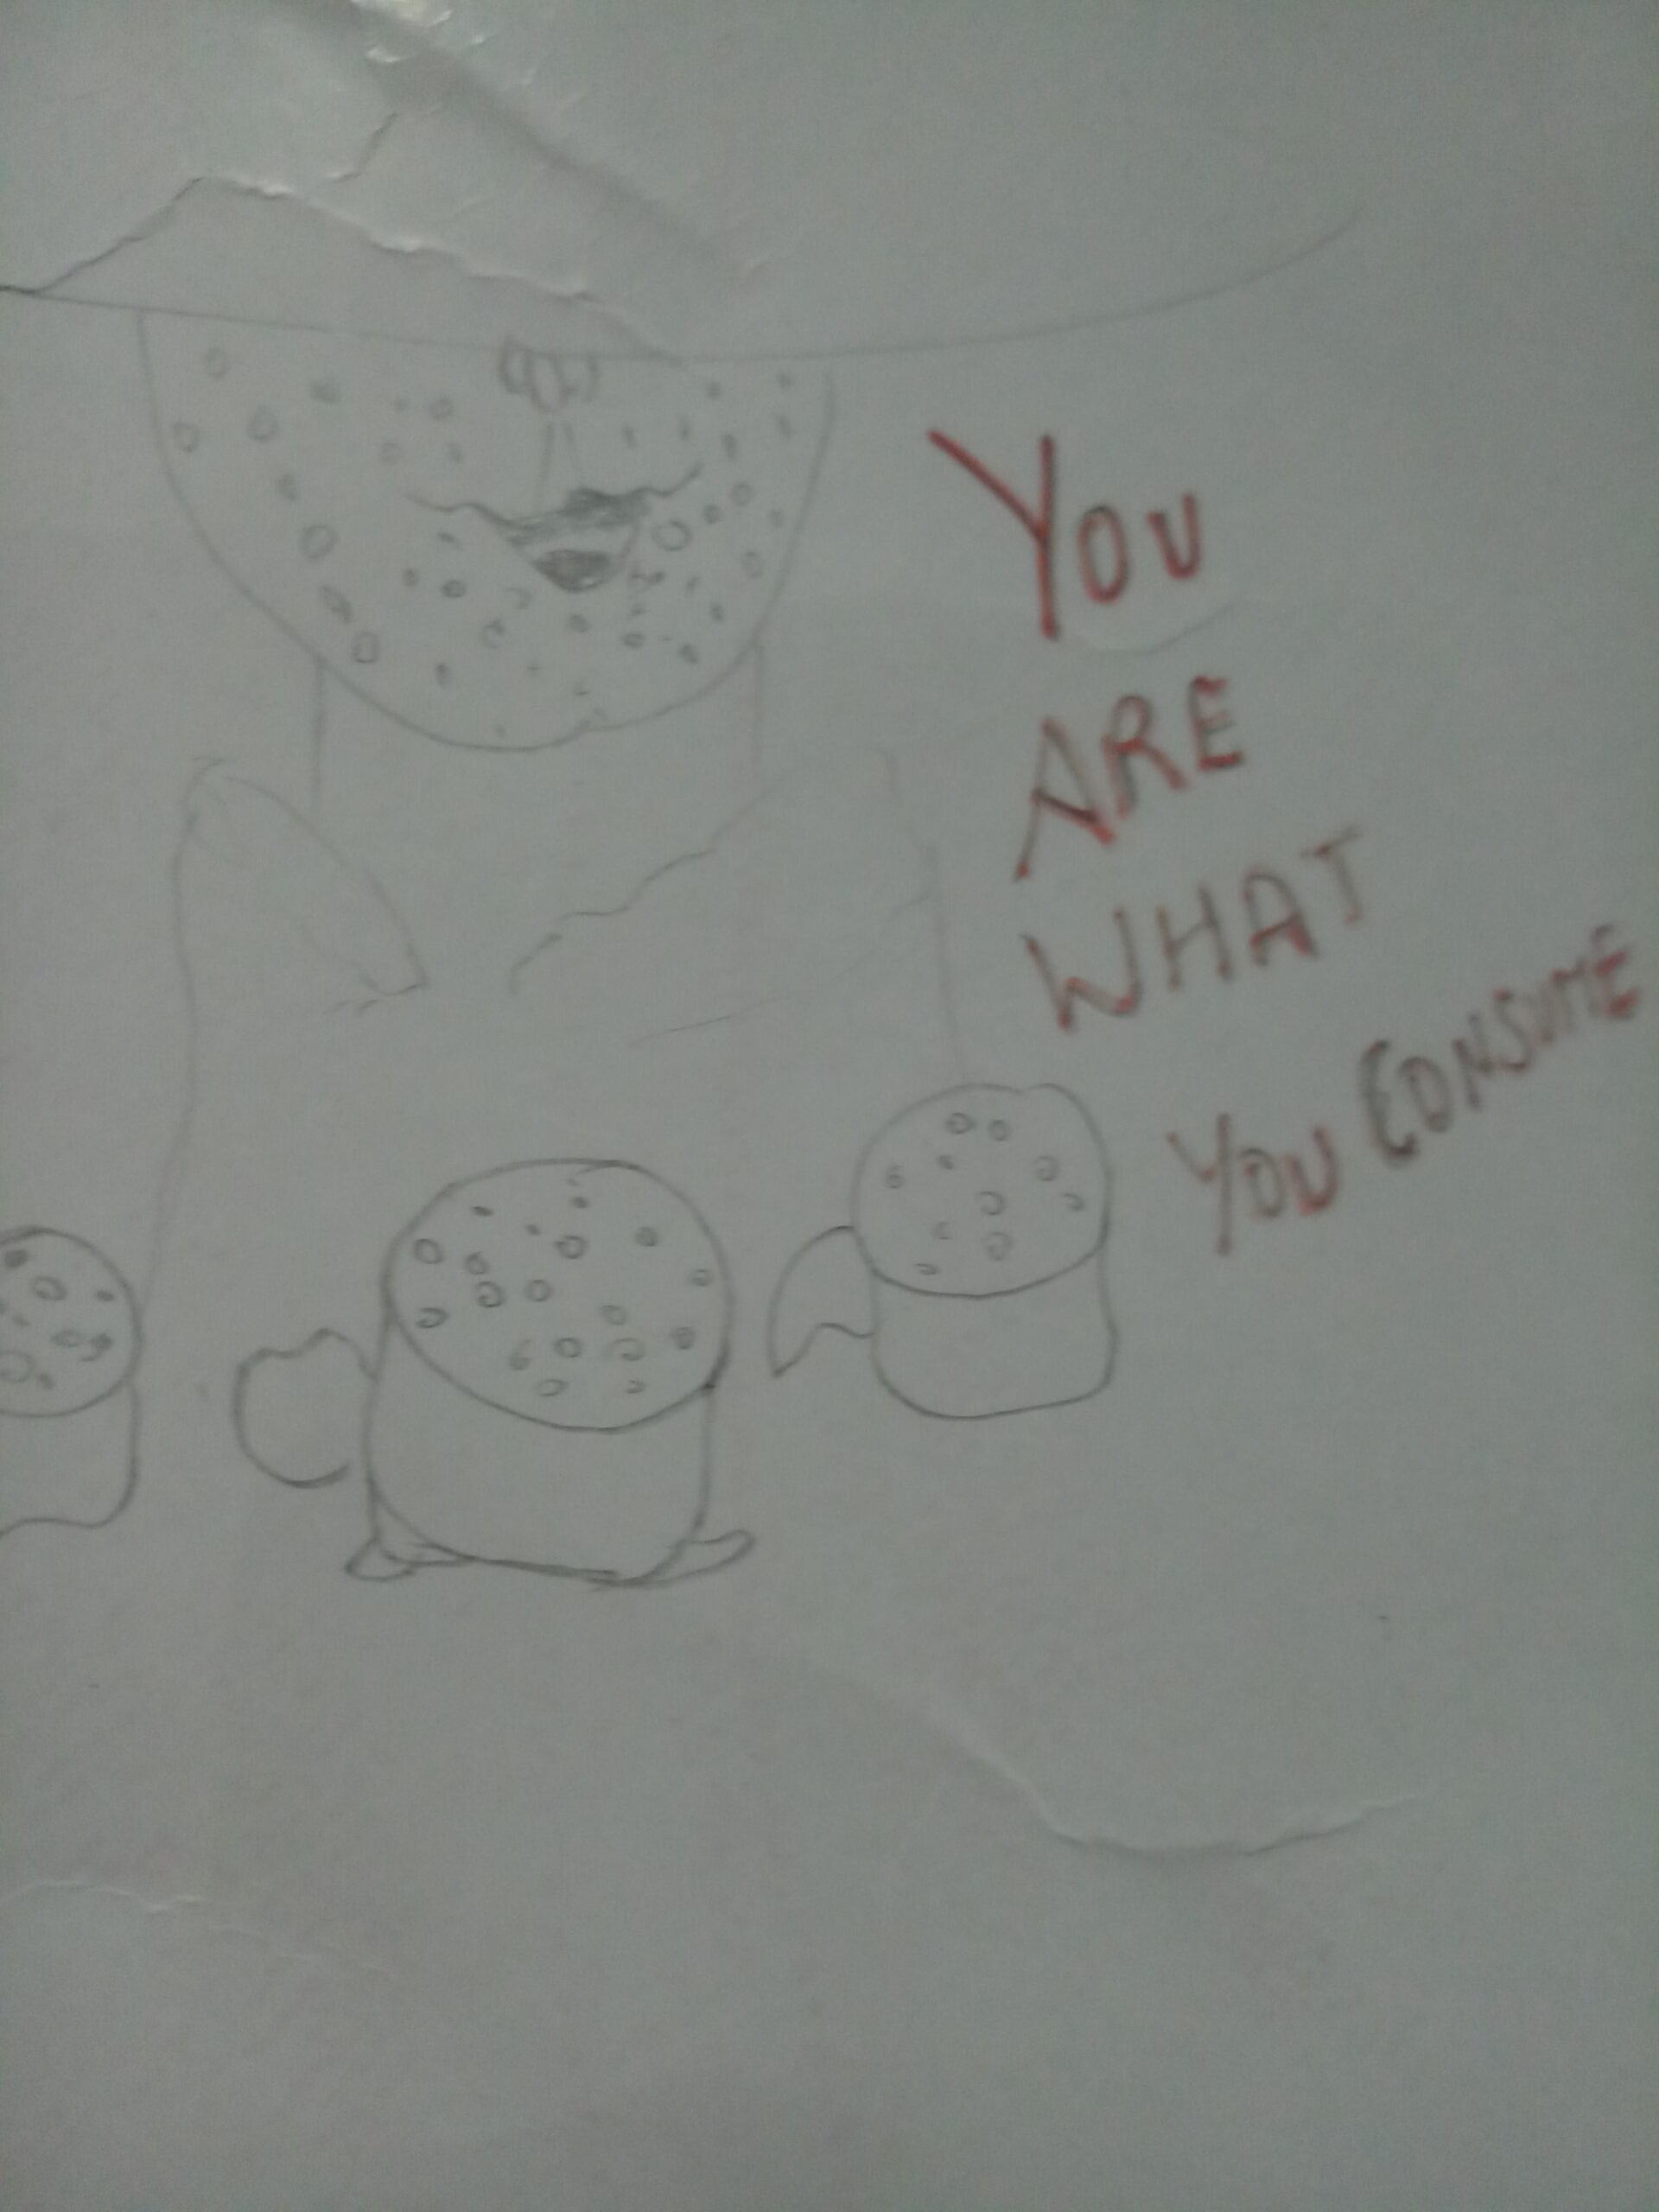 Drawing of you are what you consume